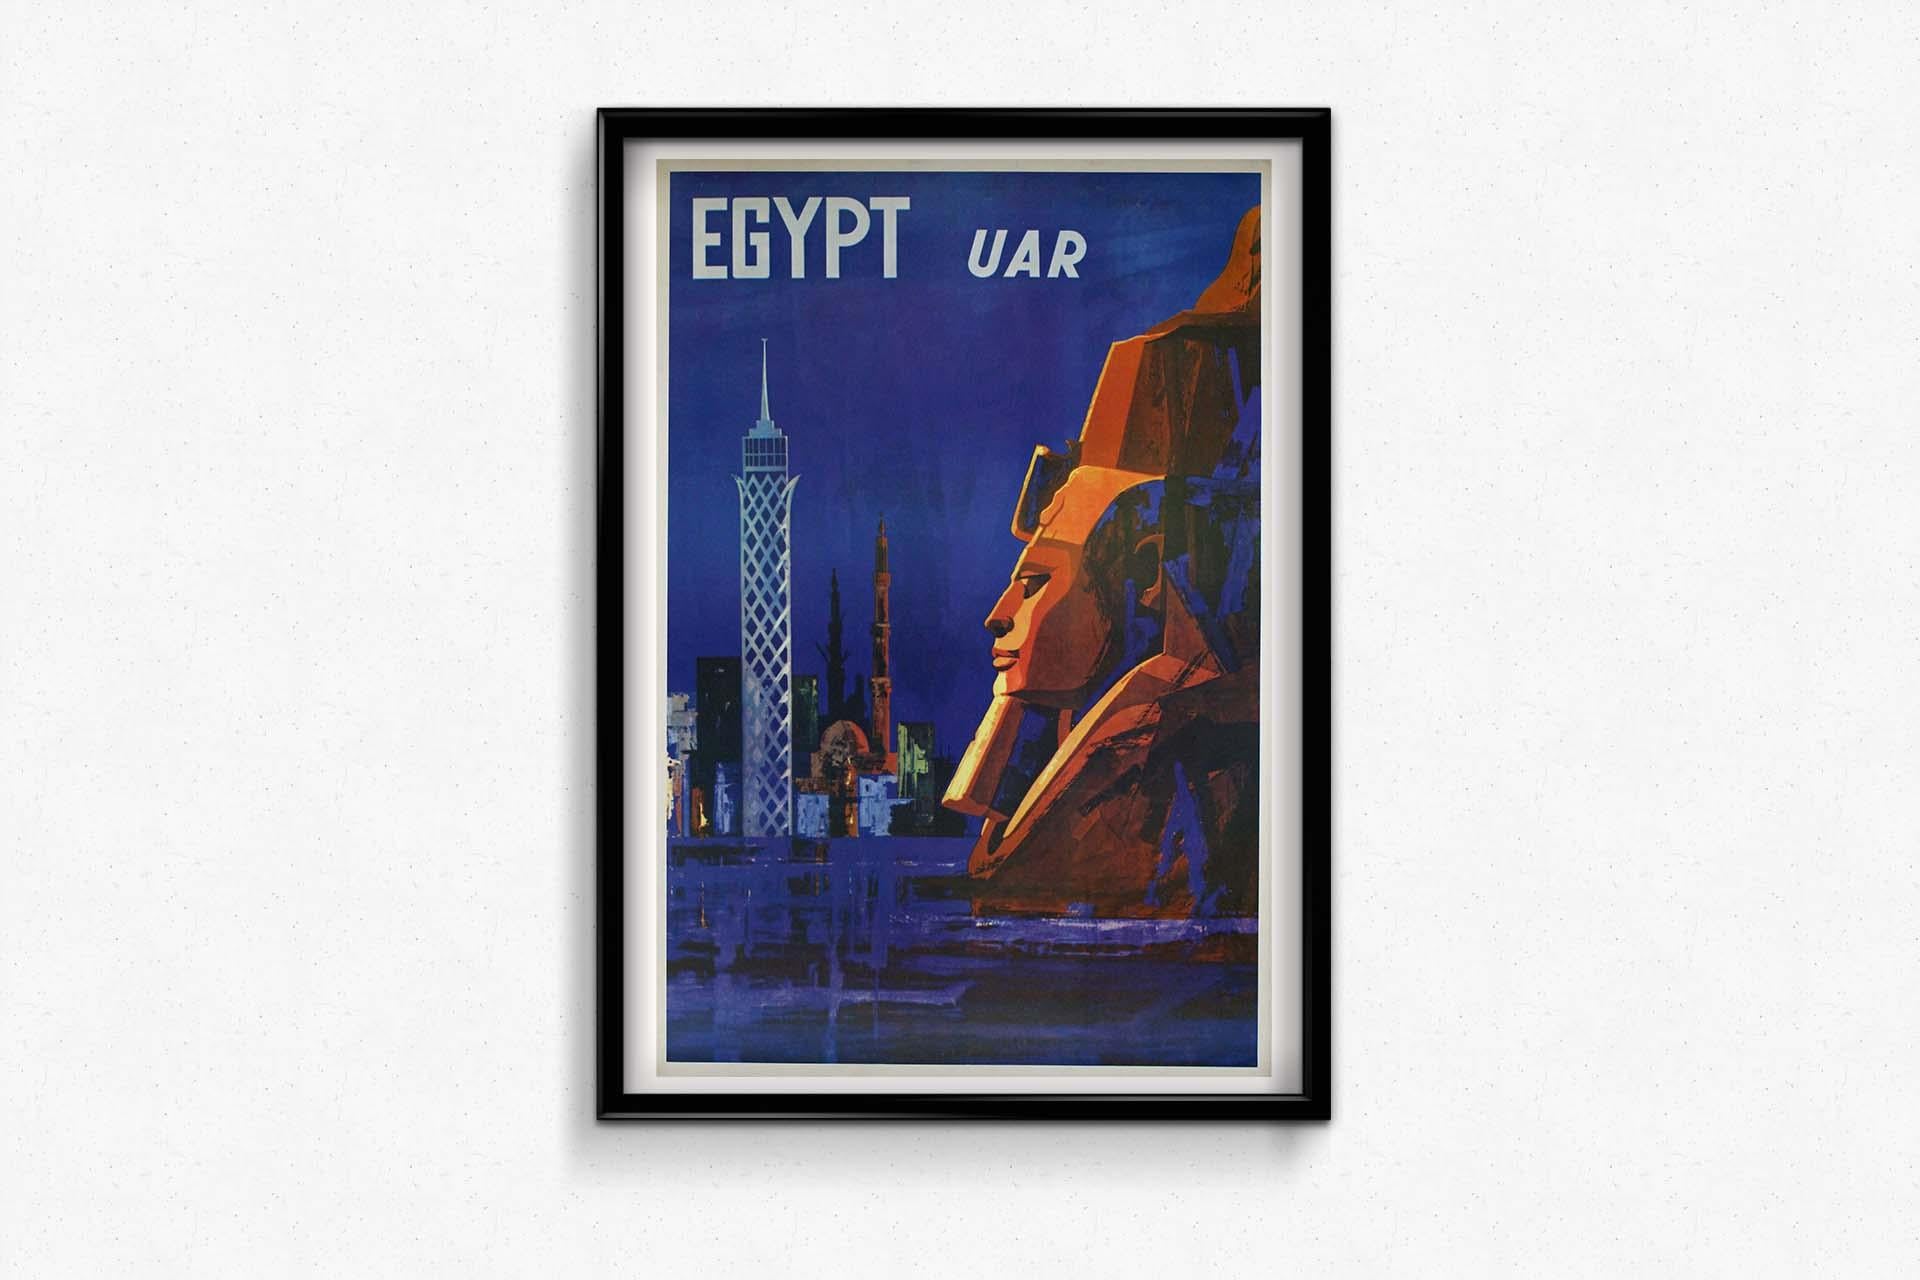 Circa 1960 Egypt UAR (United Arab Republic) poster emerges as a mesmerizing portrayal of a journey through the ancient wonders of this culturally rich land. This iconic poster is not just a promotional piece; it's an artistic voyage beckoning